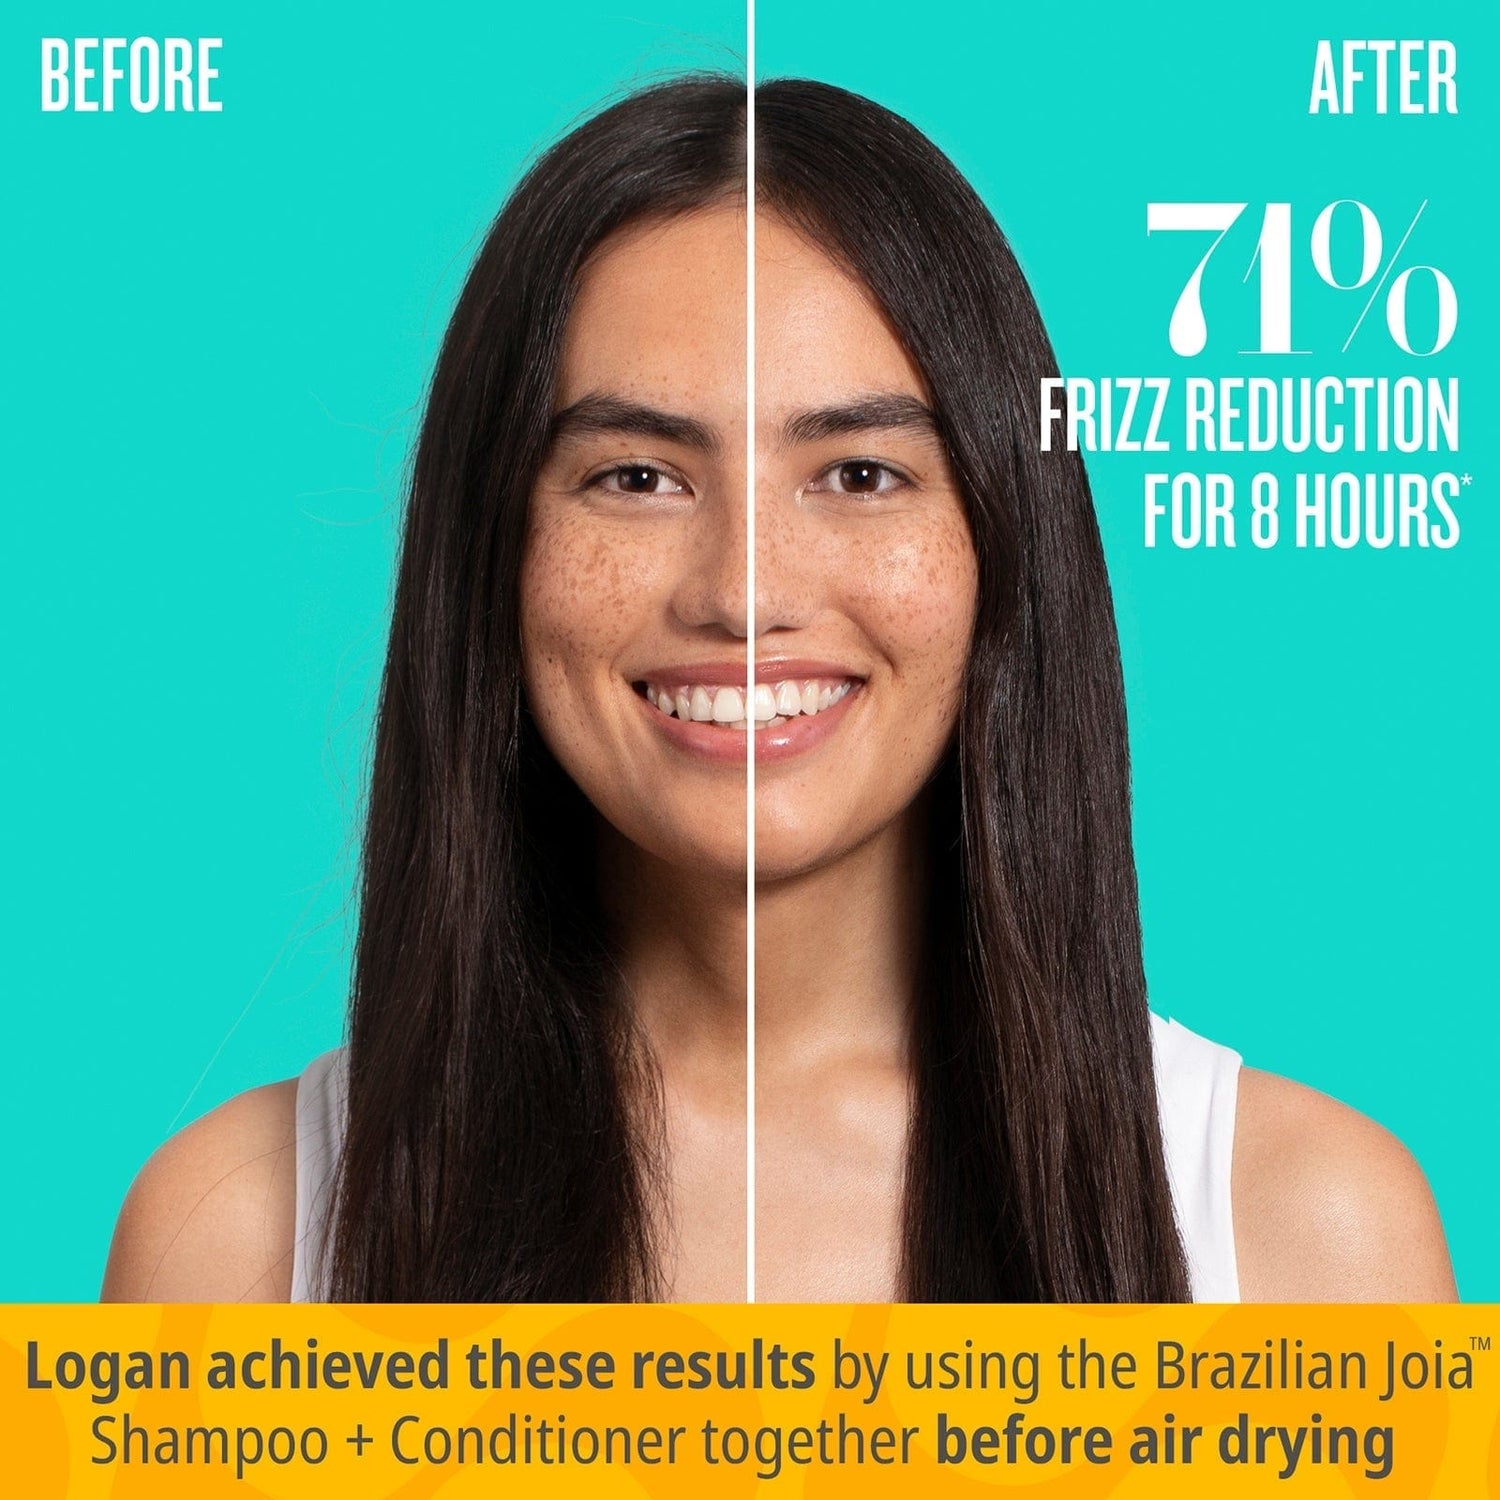 Before // After 71% frizz reduction for 8 hours* Logan achieved these results by using the Brazilian joia shampoo + conditioner together before hair drying